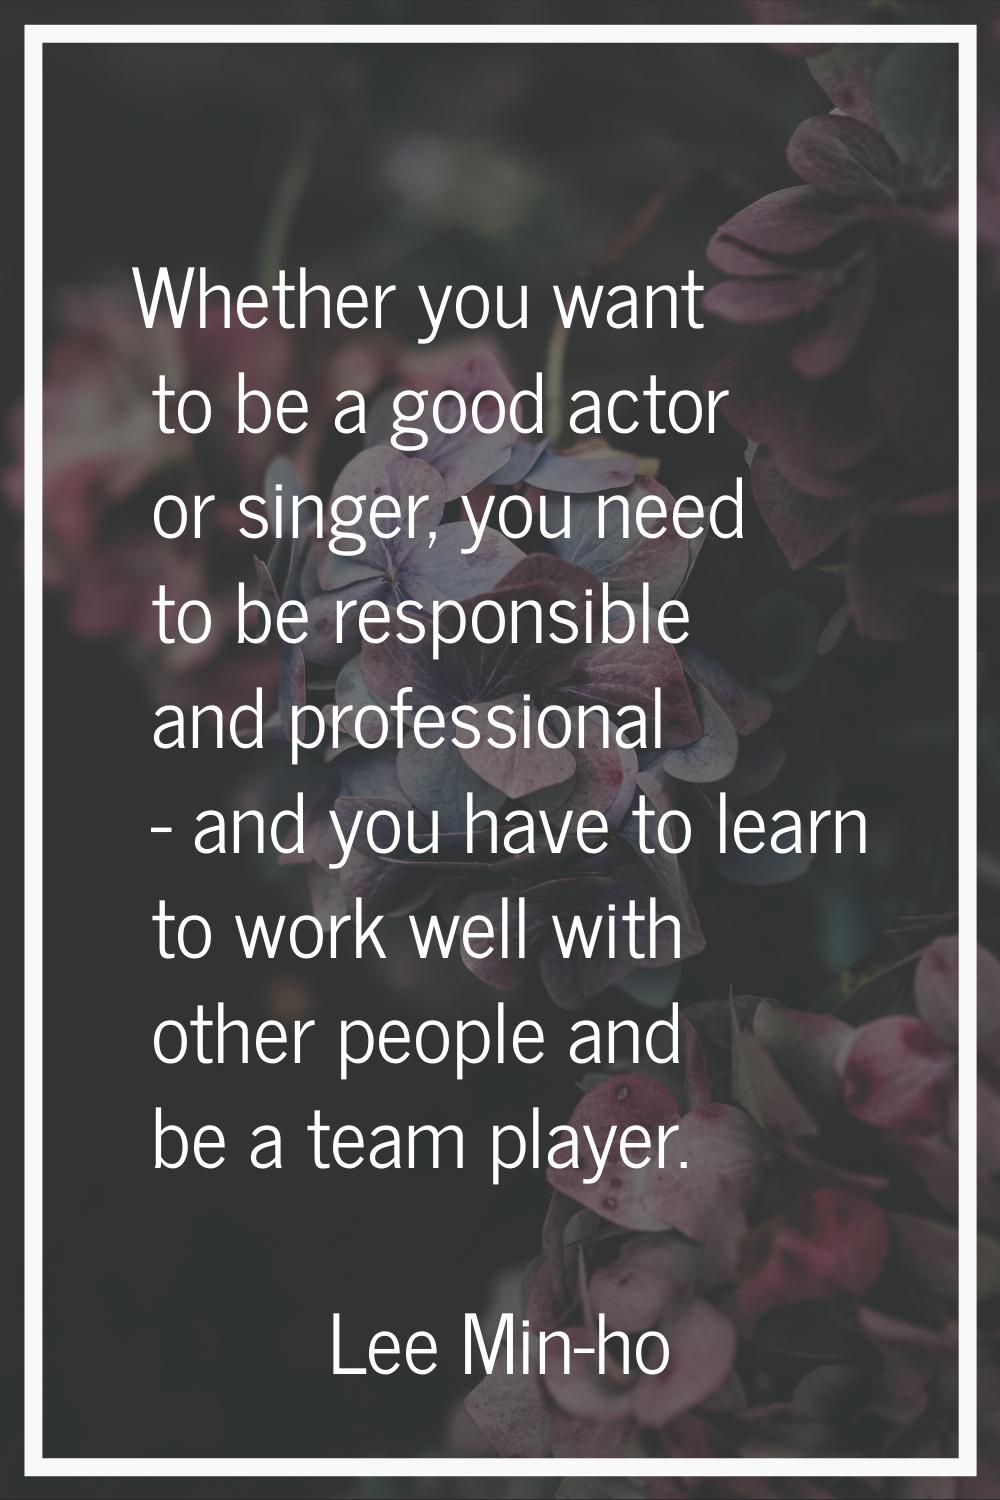 Whether you want to be a good actor or singer, you need to be responsible and professional - and yo